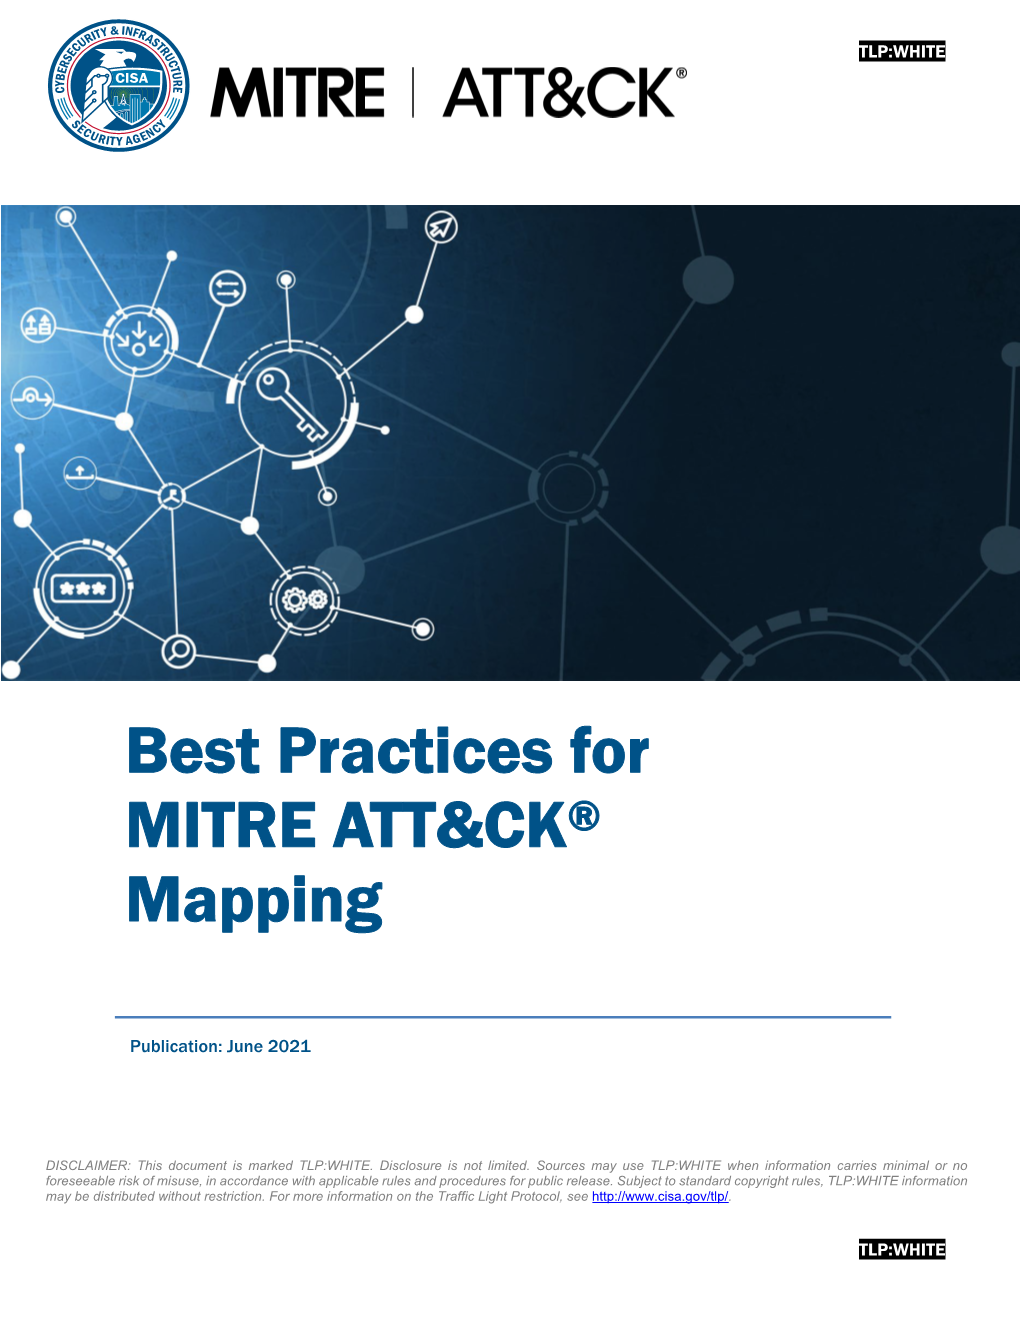 Best Practices for MITRE ATT&CK® Mapping